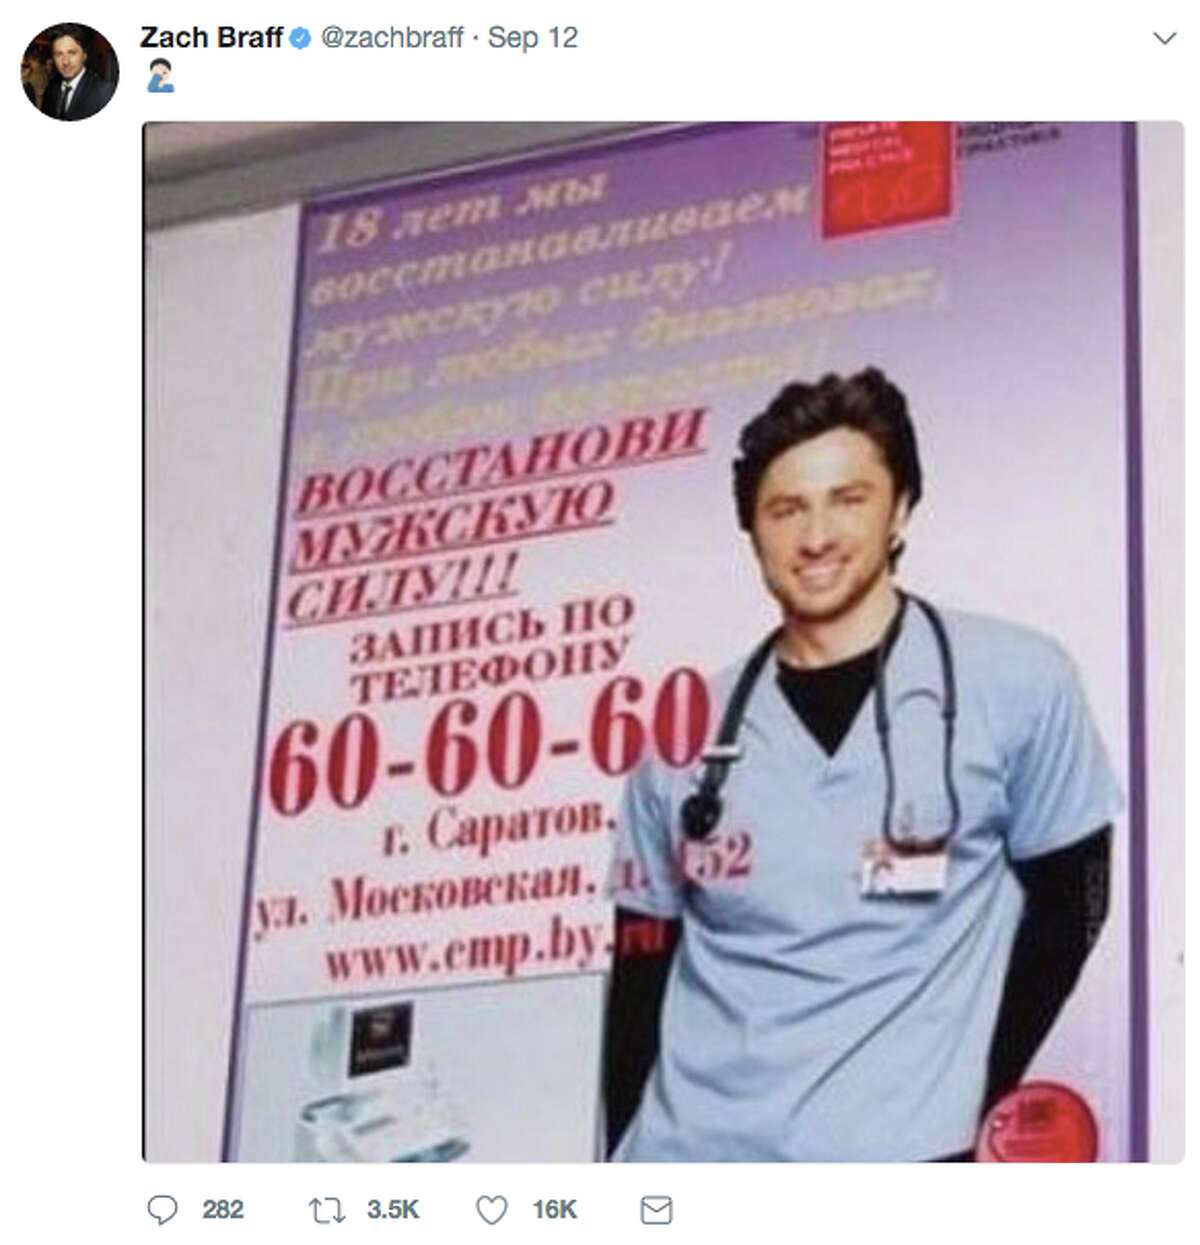 The likeness of Zach Braff was used on a Russian advertisement for erectile dysfunction. He's not the only celebrity whose image has been used, likely without permission, to promote a product. 